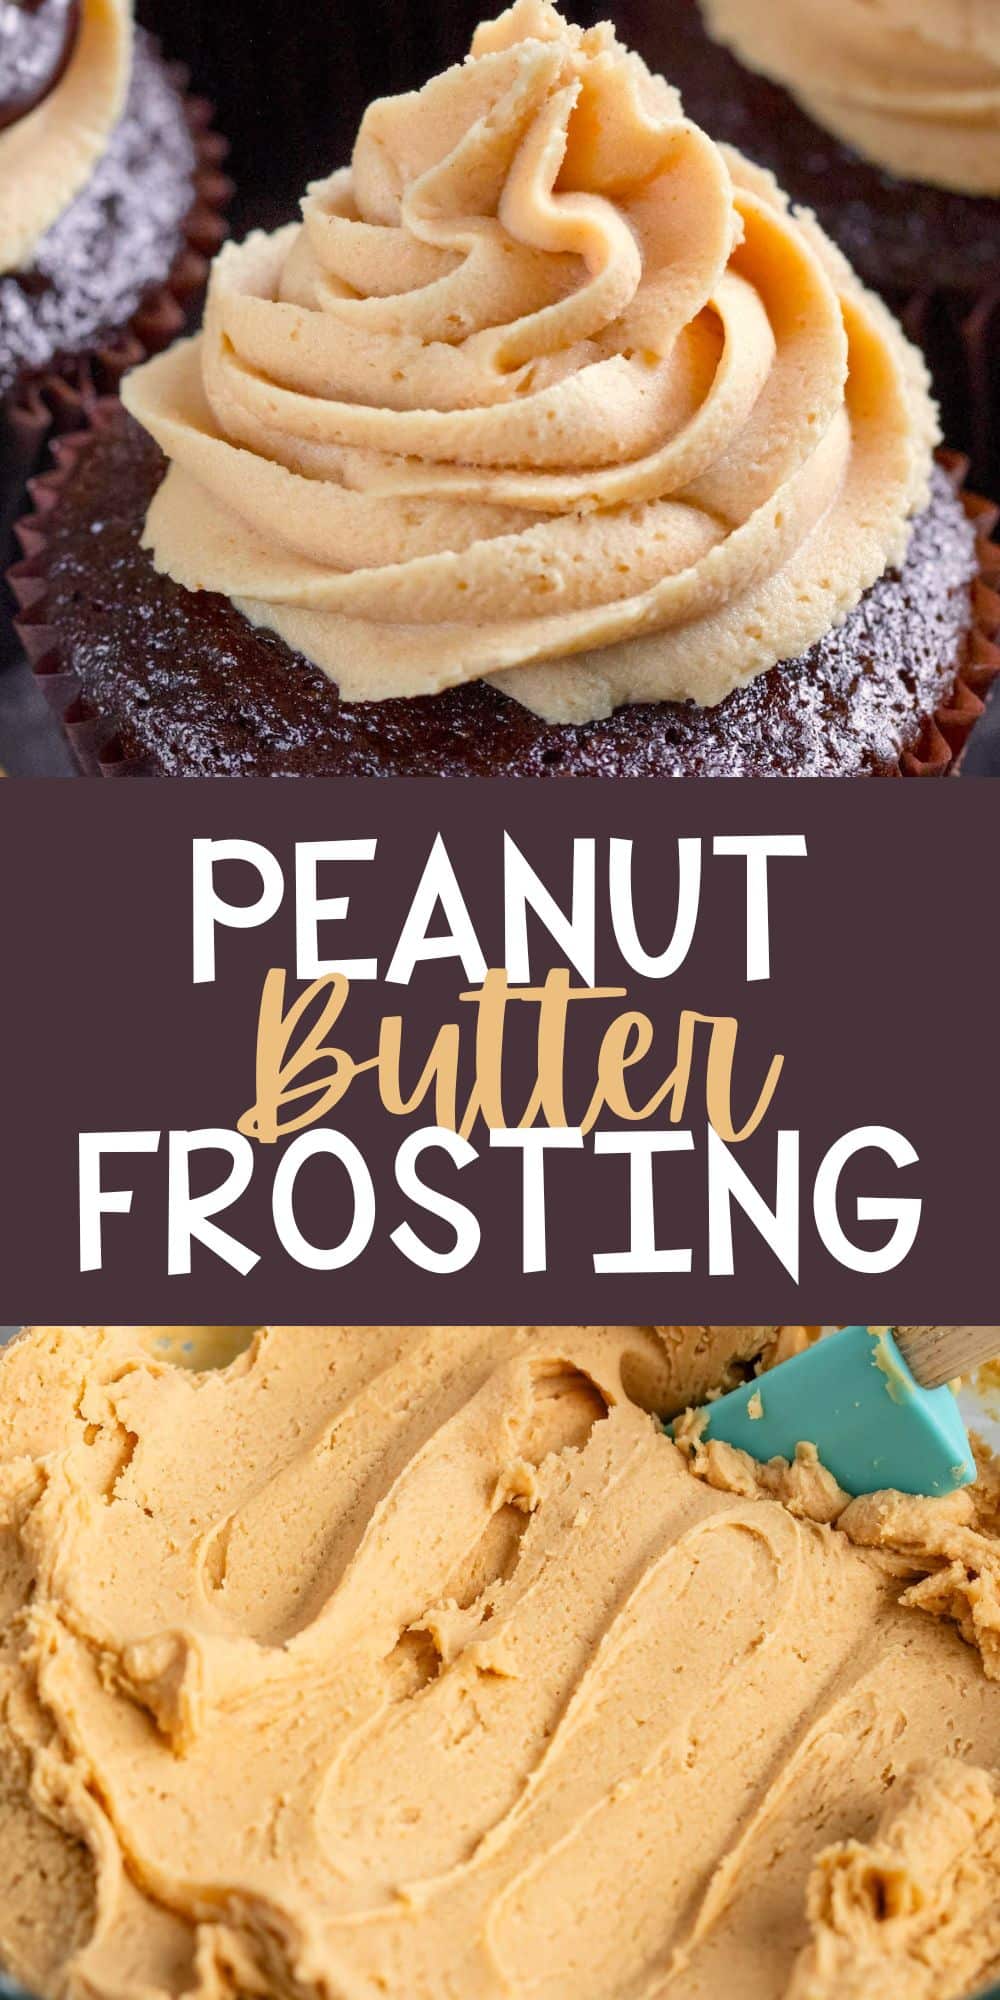 two photos of chocolate cupcakes with peanut butter frosting on top with words on the image.